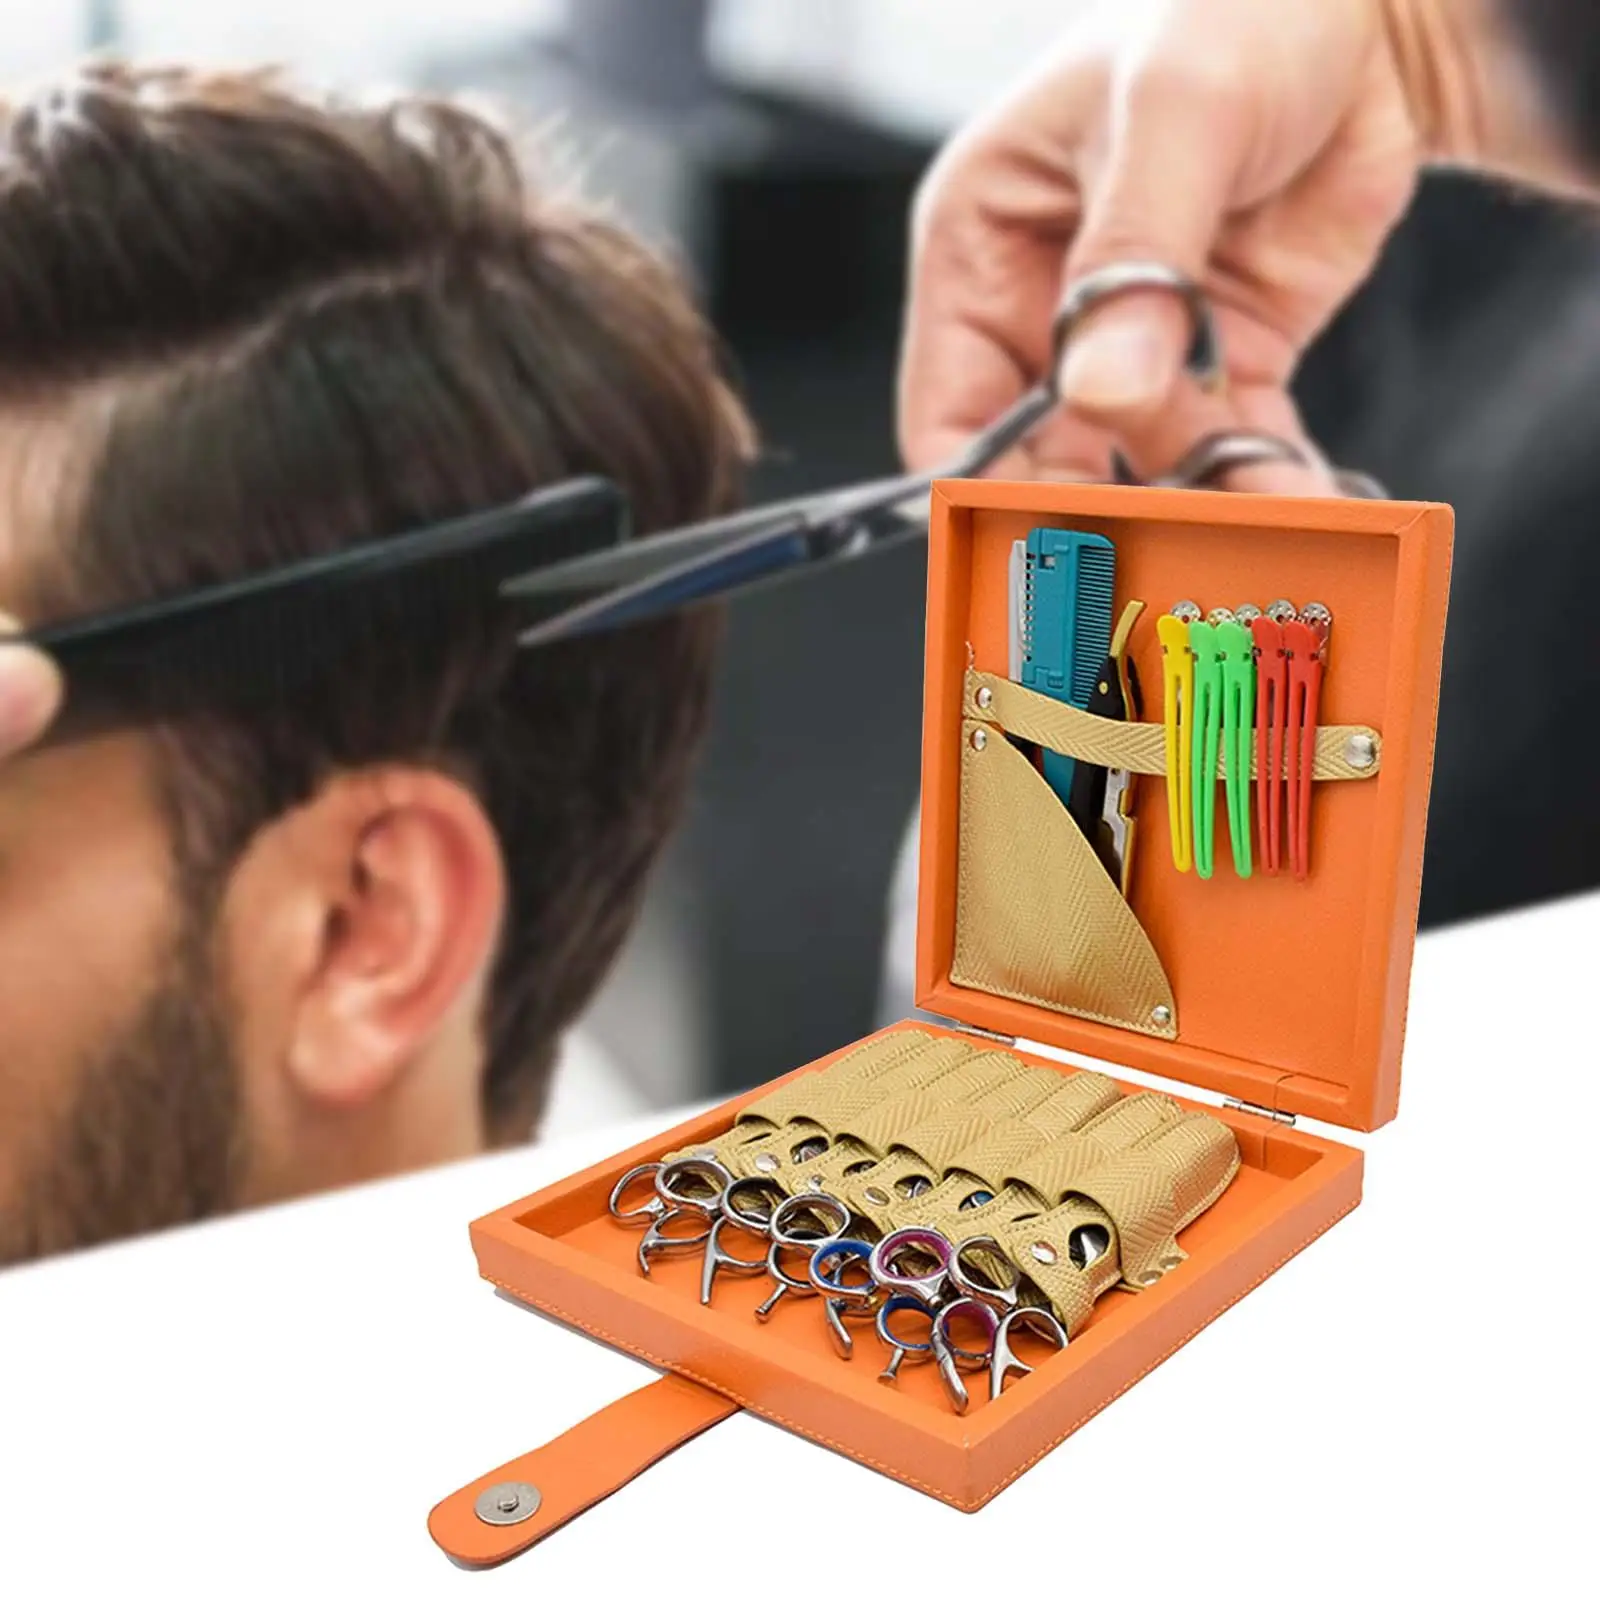 Barber Shears Storage Hair Scissors Box PU Leather Versatile Compact Size for Multiple Scissors, Combs, Hair Clips Sturdy Orange